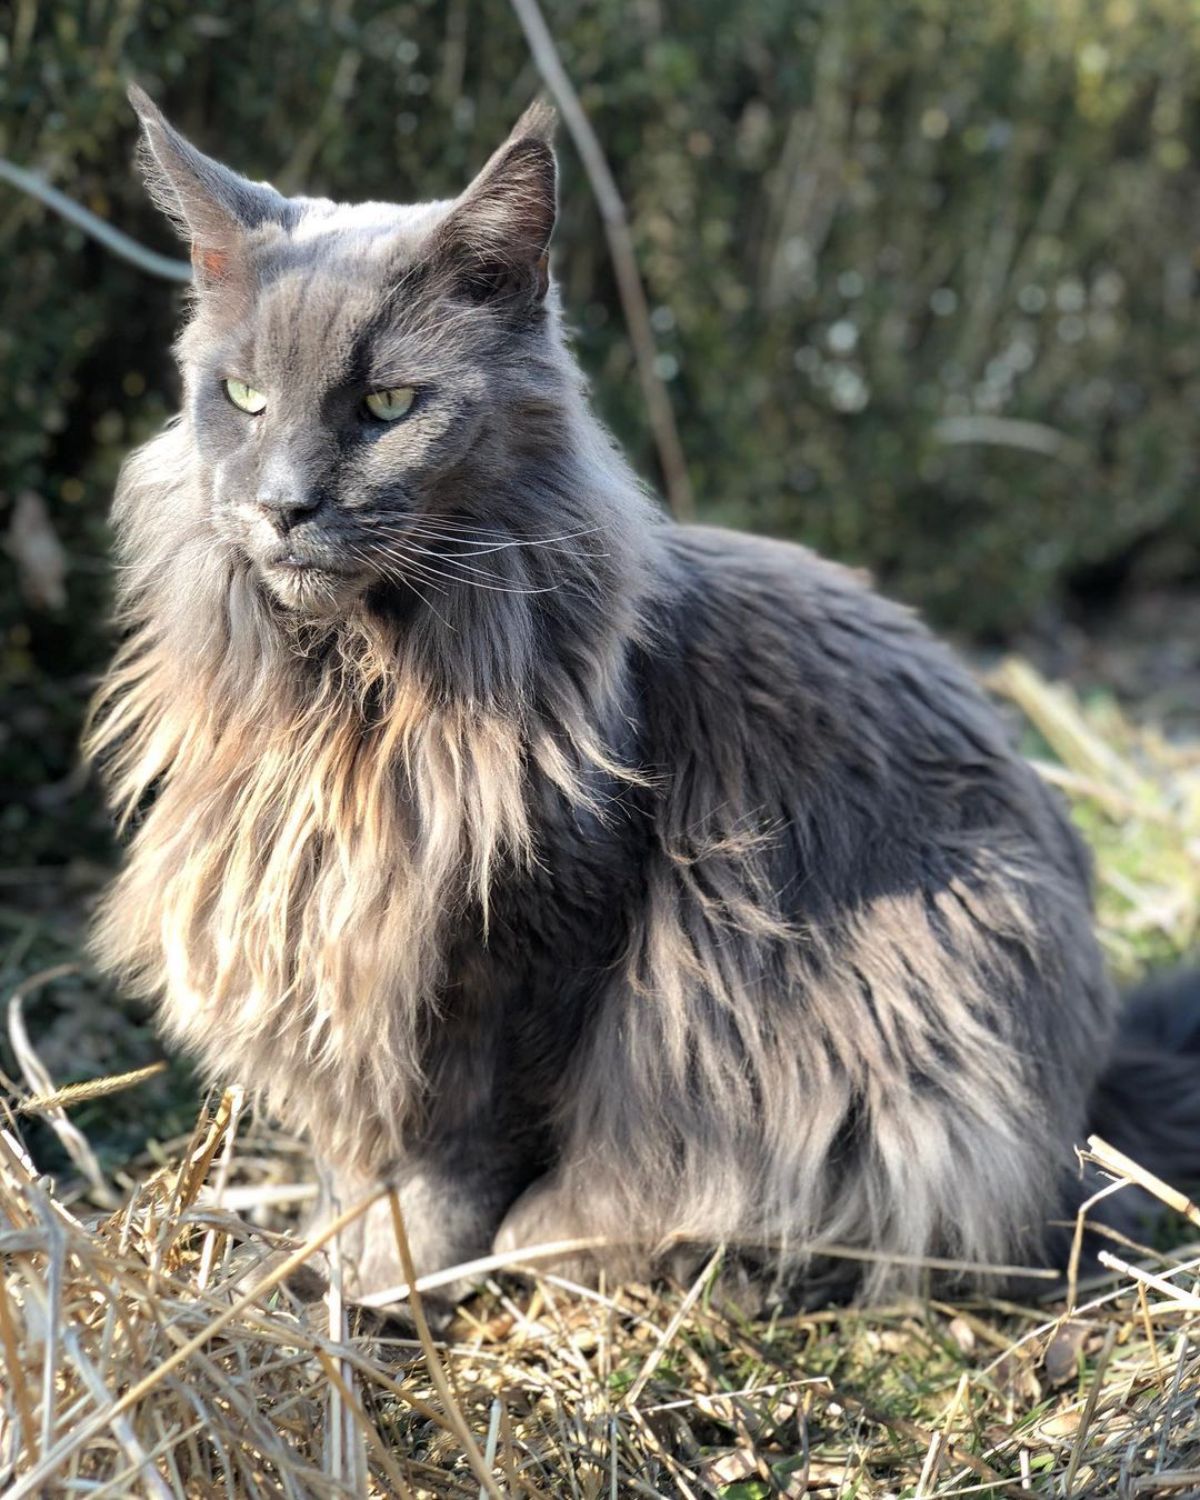 A huge flufy gray maine coon cat sitting on a straw.